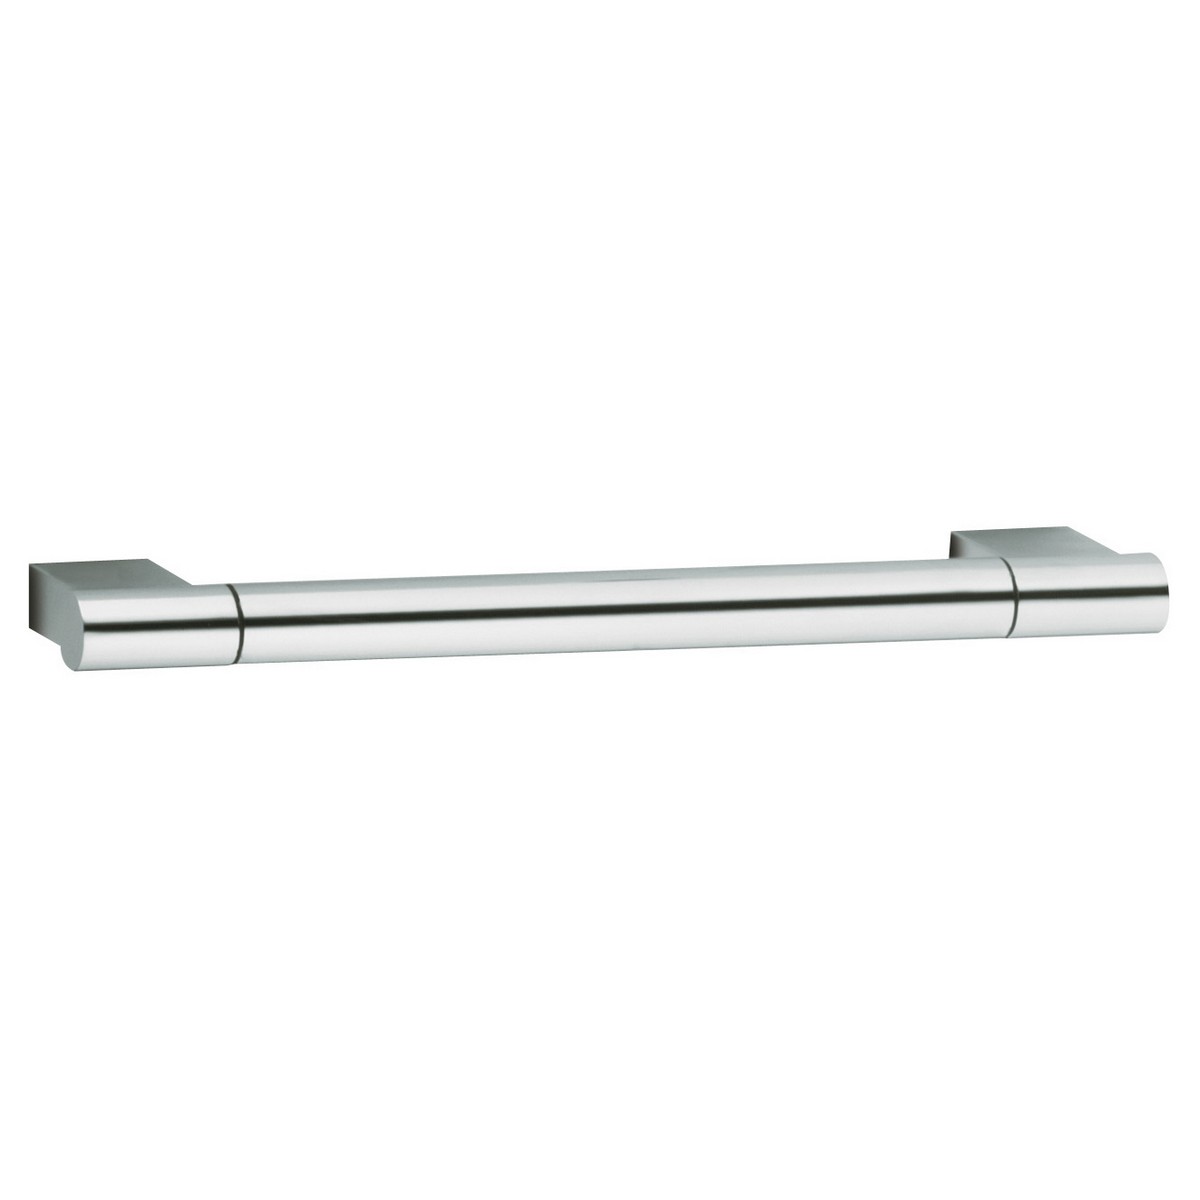 KEUCO 149070000 PLAN 13 3/4 INCH WALL MOUNTED SUPPORT RAIL